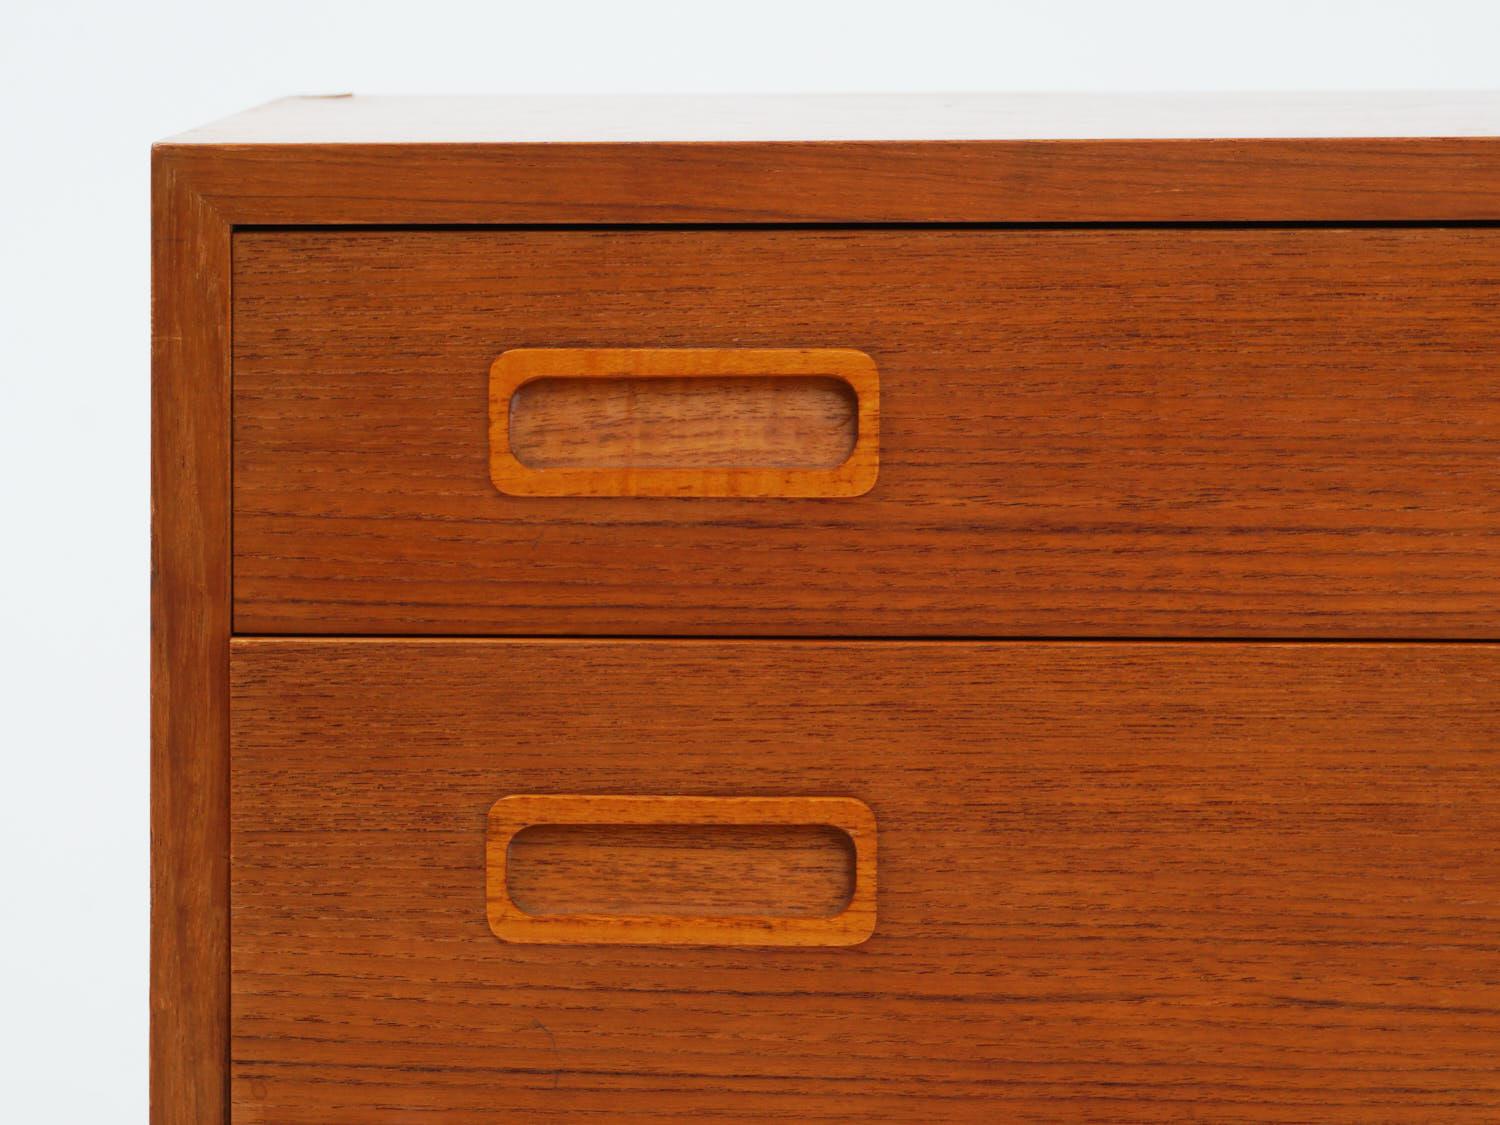 Small but mighty, this Mid-Century Modern 1950s teak wood dresser packs a punch with four spacious drawers ready to hold all your threads and tchotchkes.

- 26.5